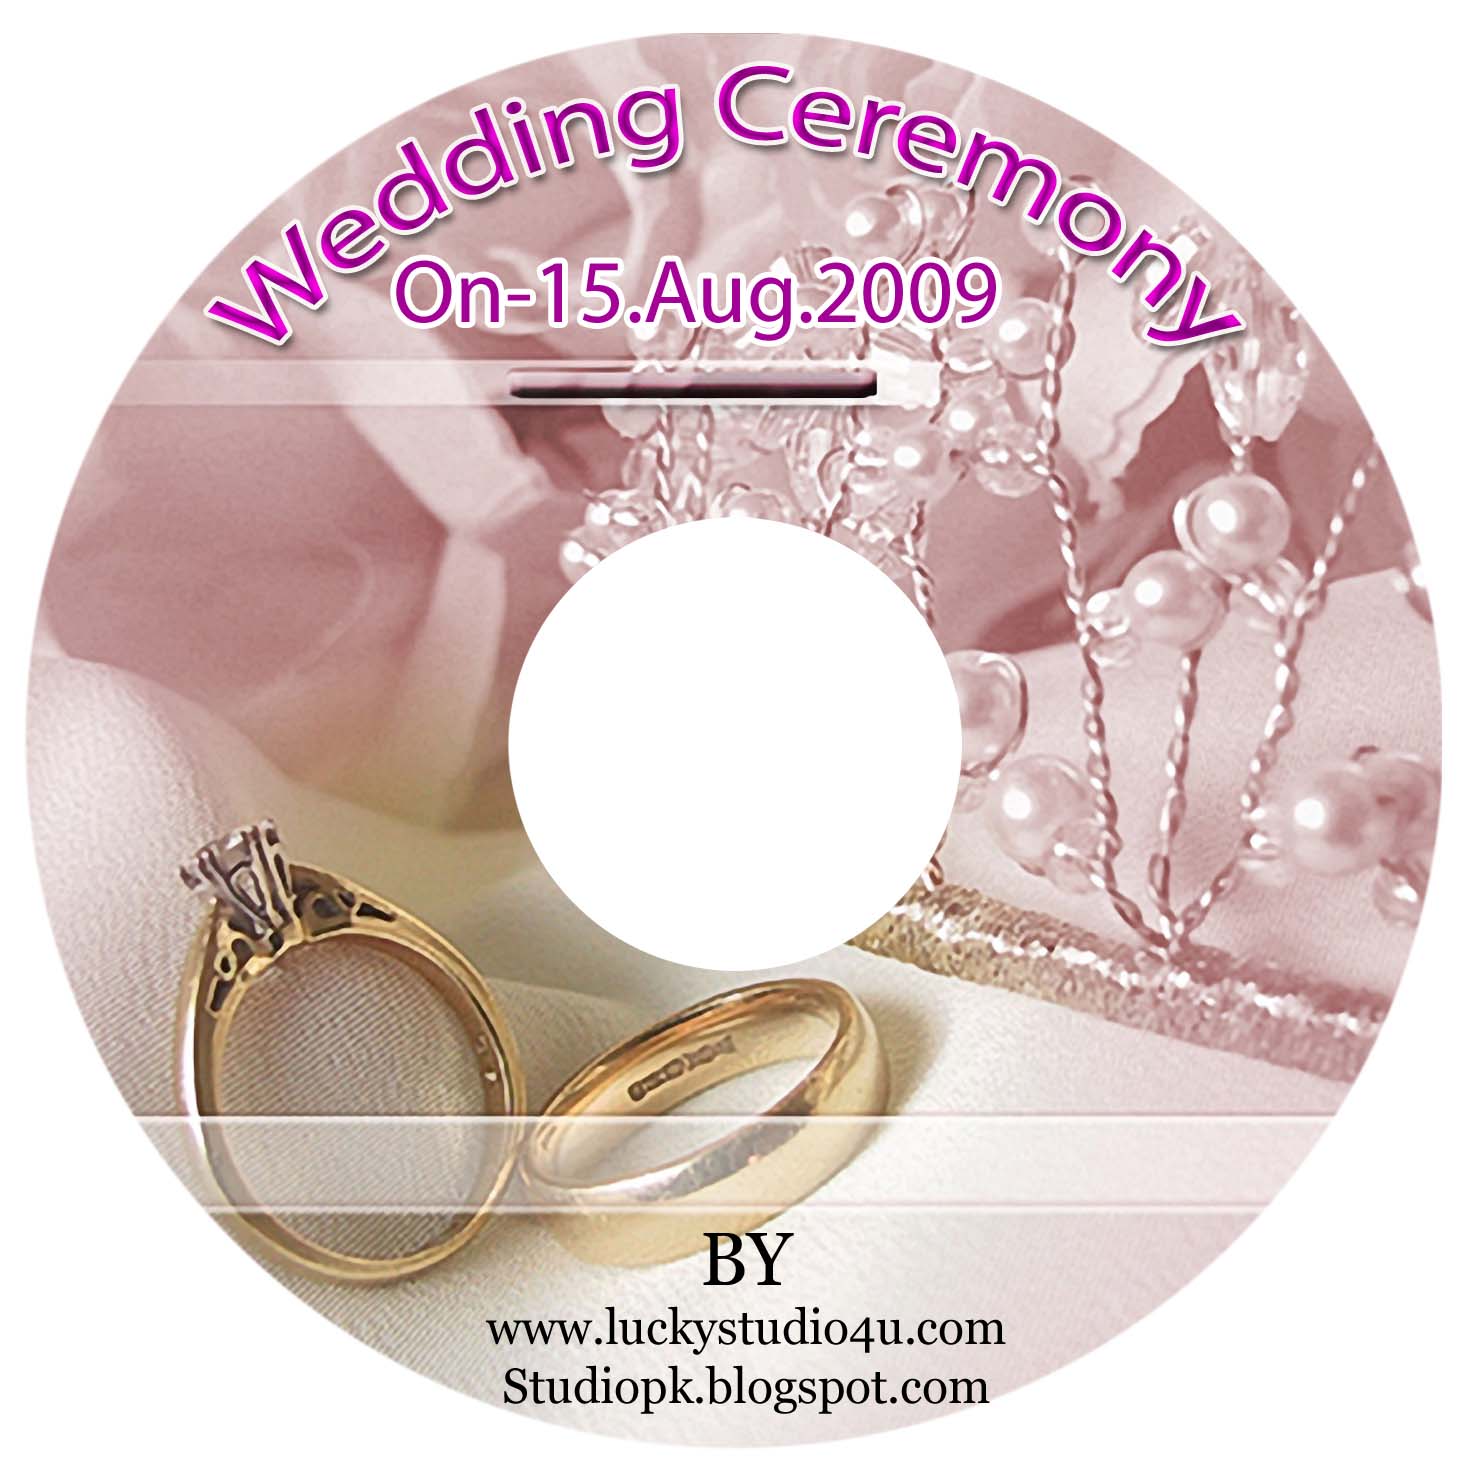 27 Wedding Dvd Cover Psd Templates Free Download Wedding Dvd Cover Wedding Dvd Psd Template Free